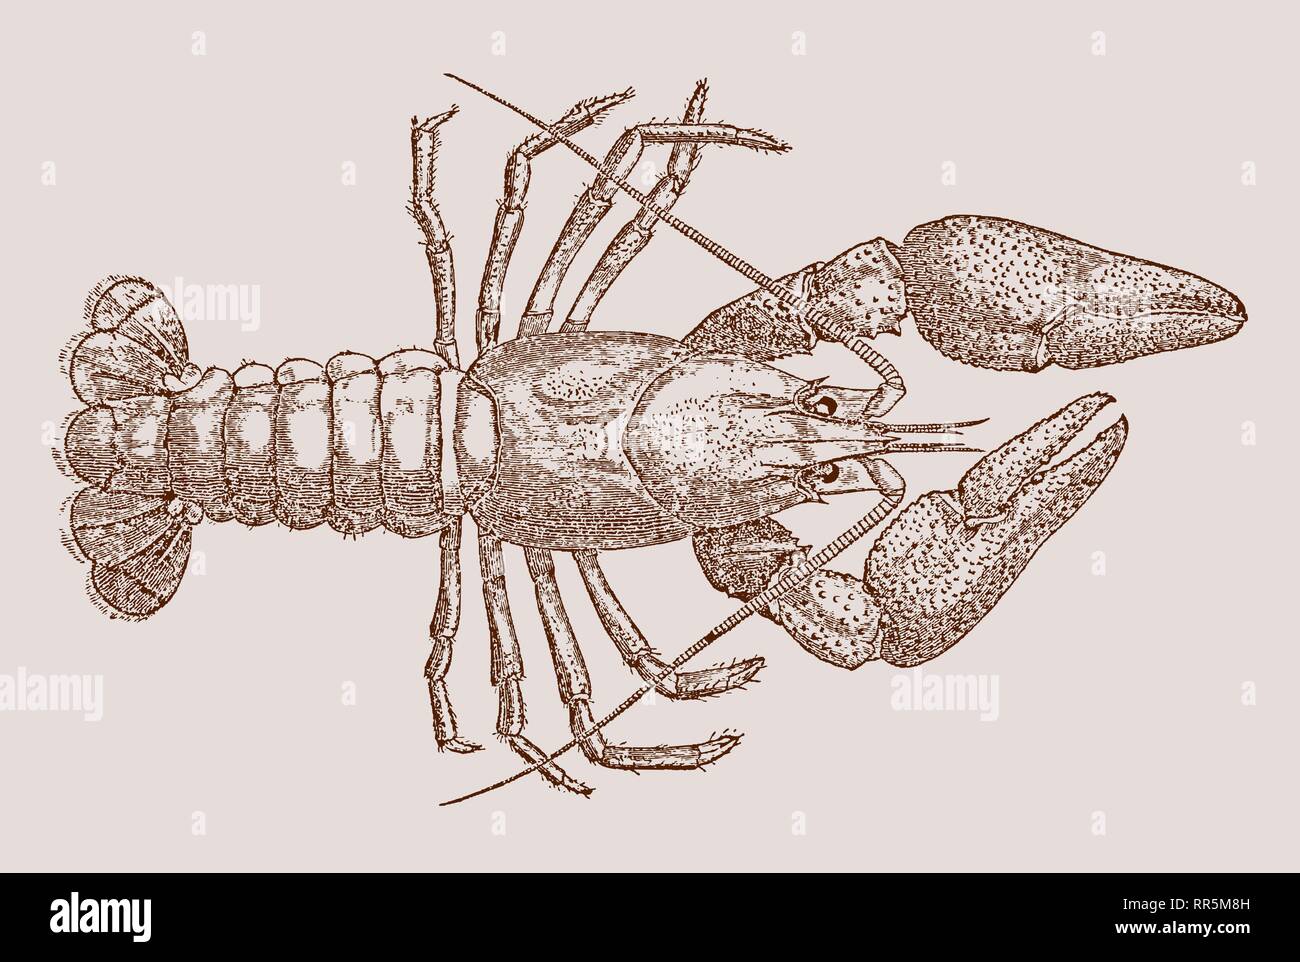 European crayfish (astacus) in top view. Illustration after a historic engraving or lithography from the 19th century. Easy editable in layers Stock Vector